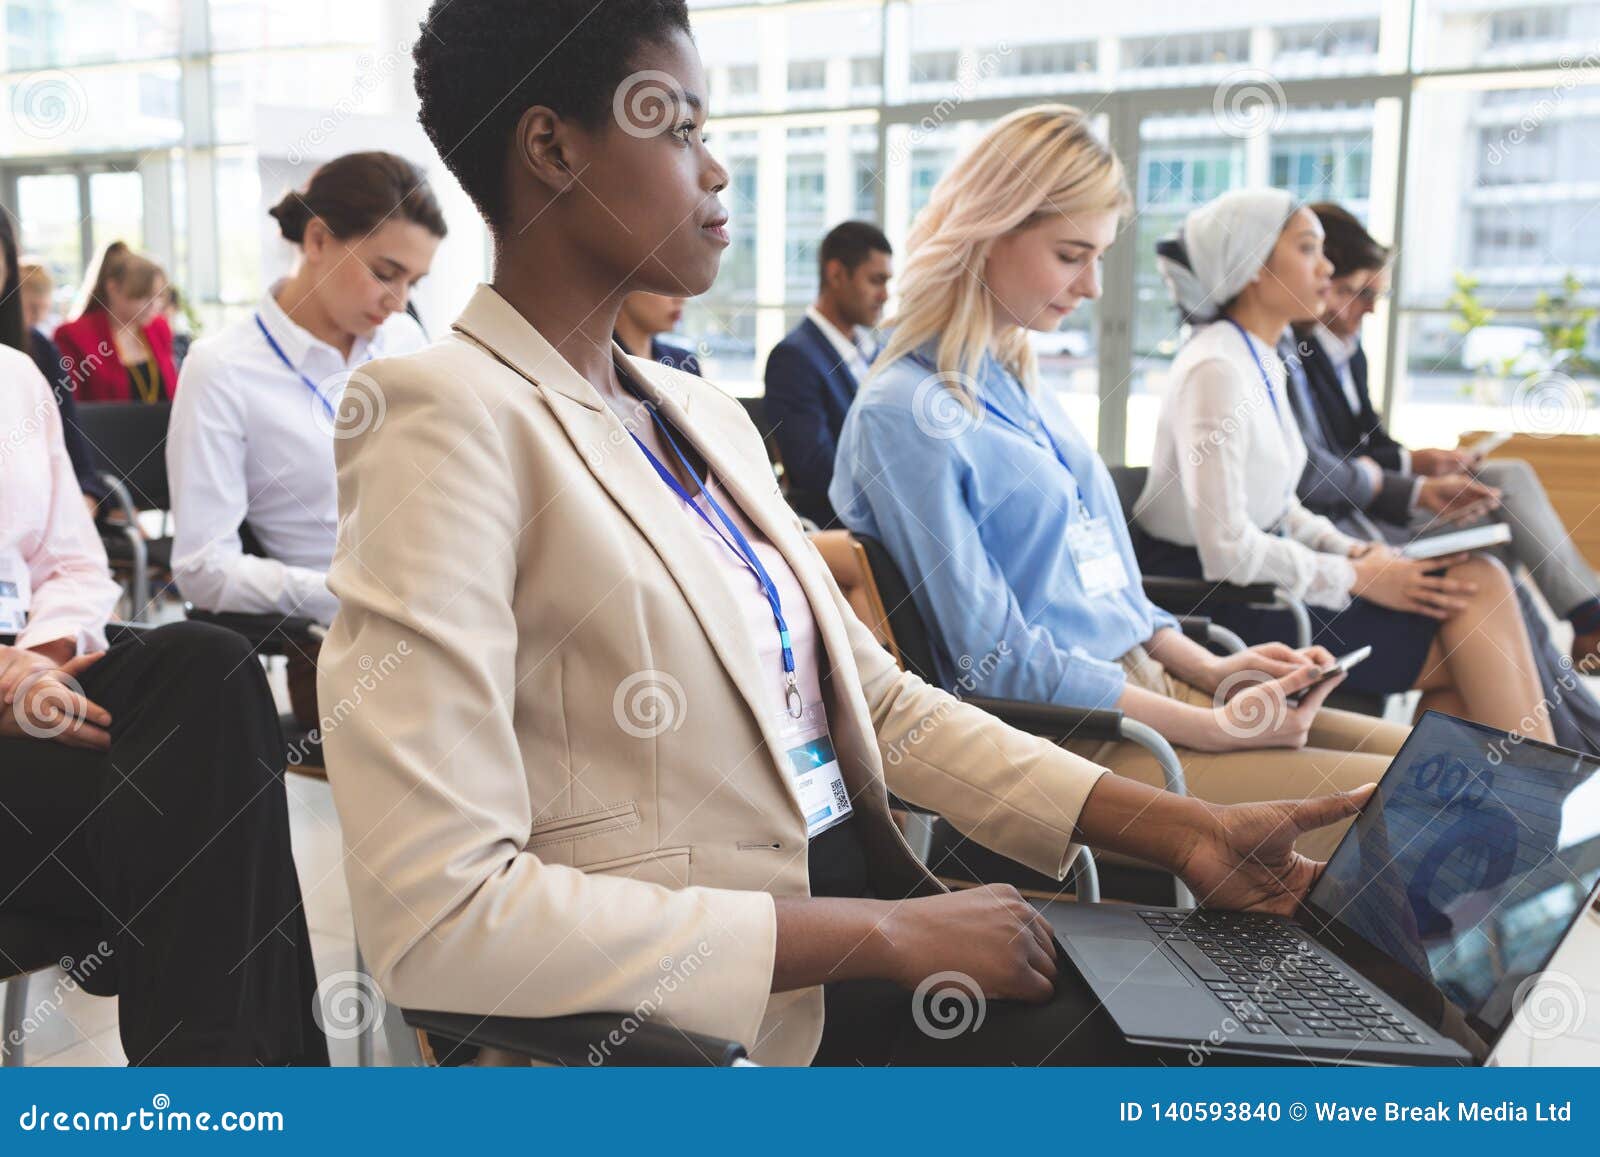  A group of people, including a woman in a beige suit using a laptop, are sitting in rows at an industry event.